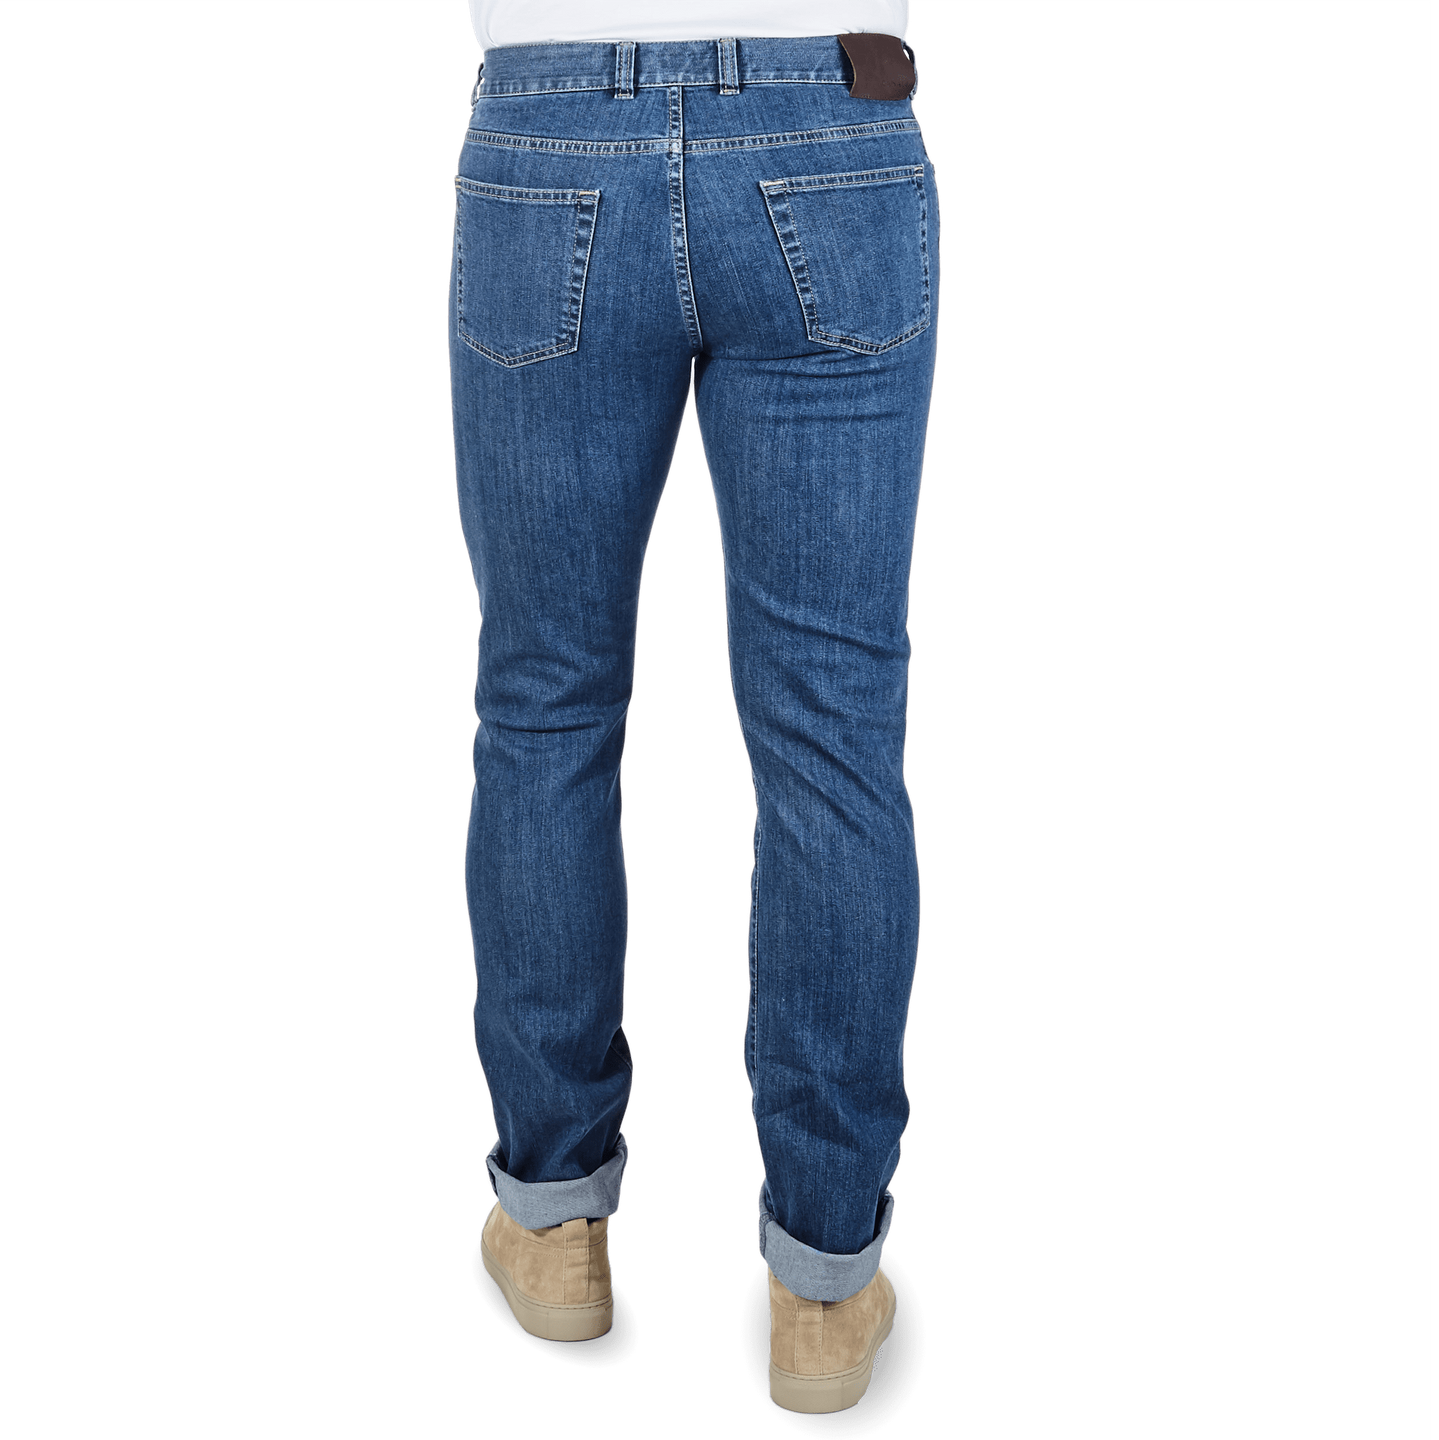 canali jeans